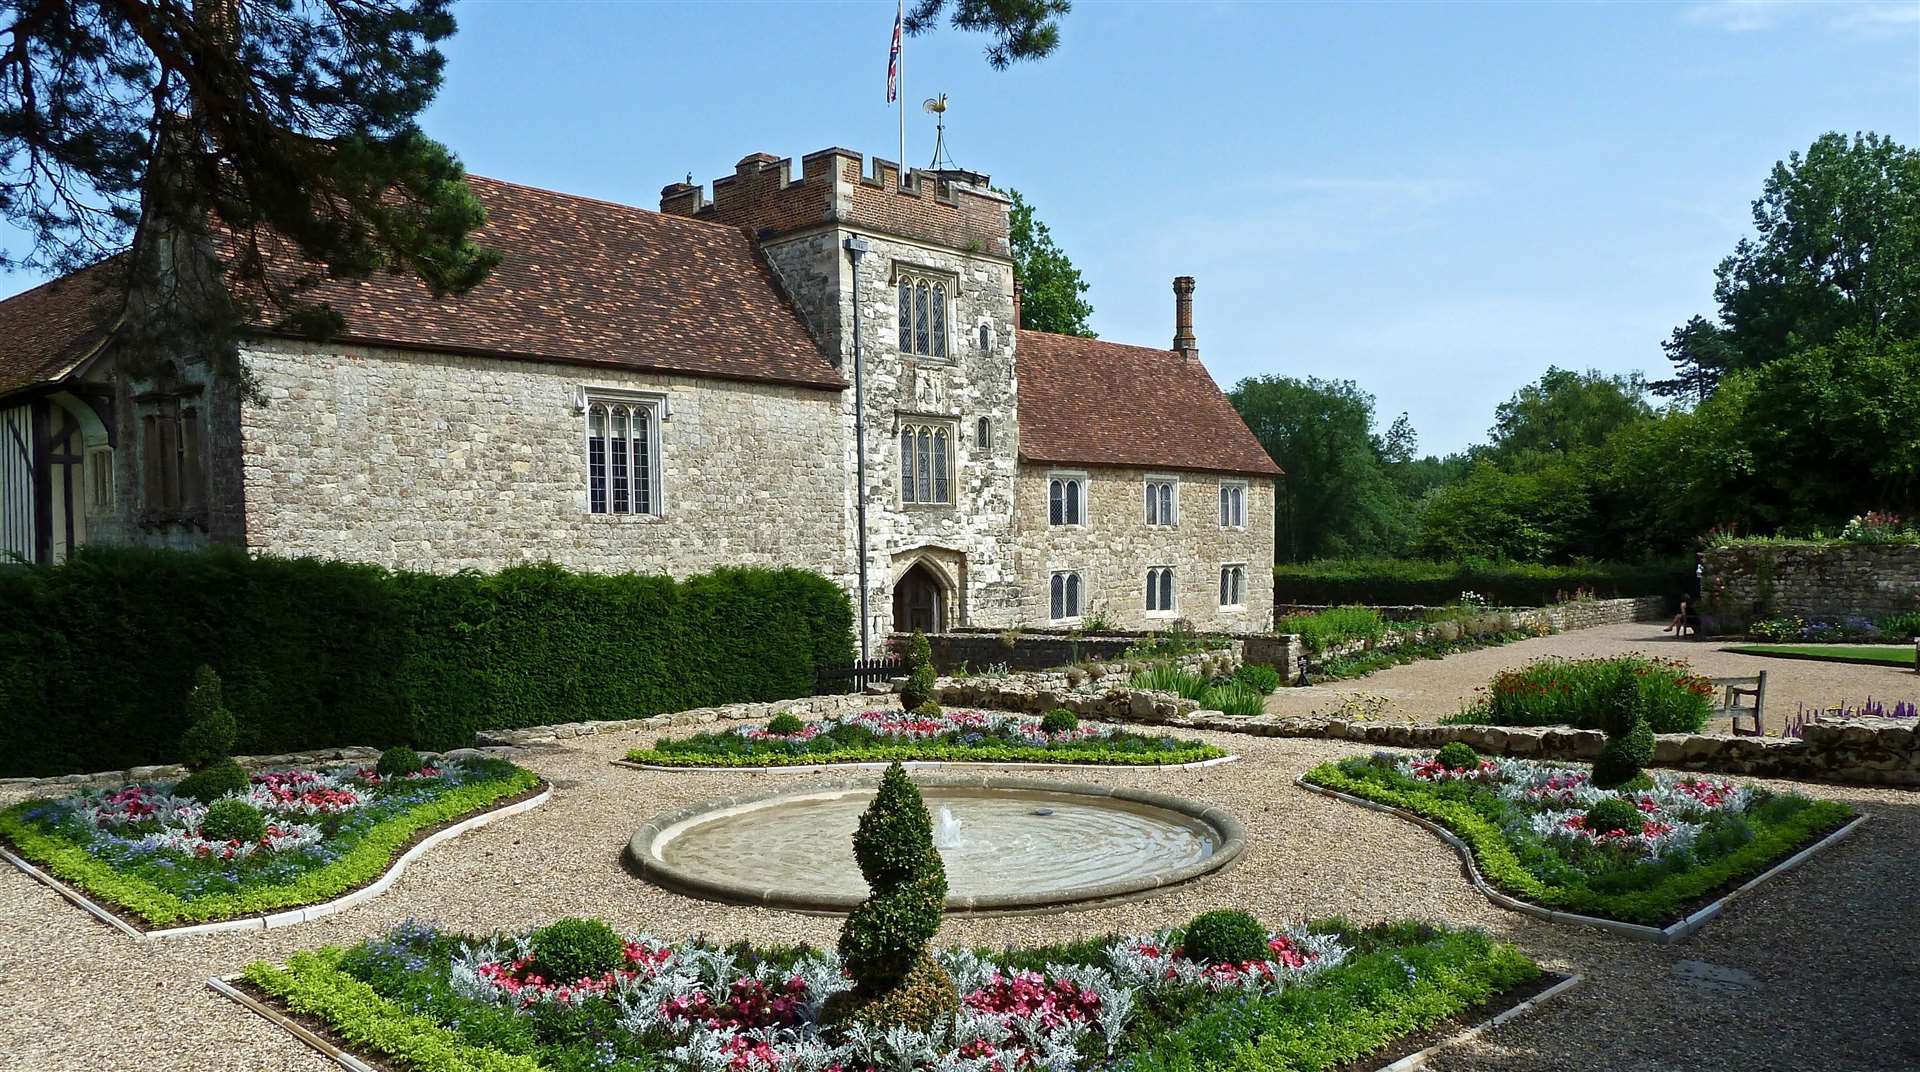 Ightham Mote has closed its staffed sites, similarly to over National Trust sites, but has kept its estate open